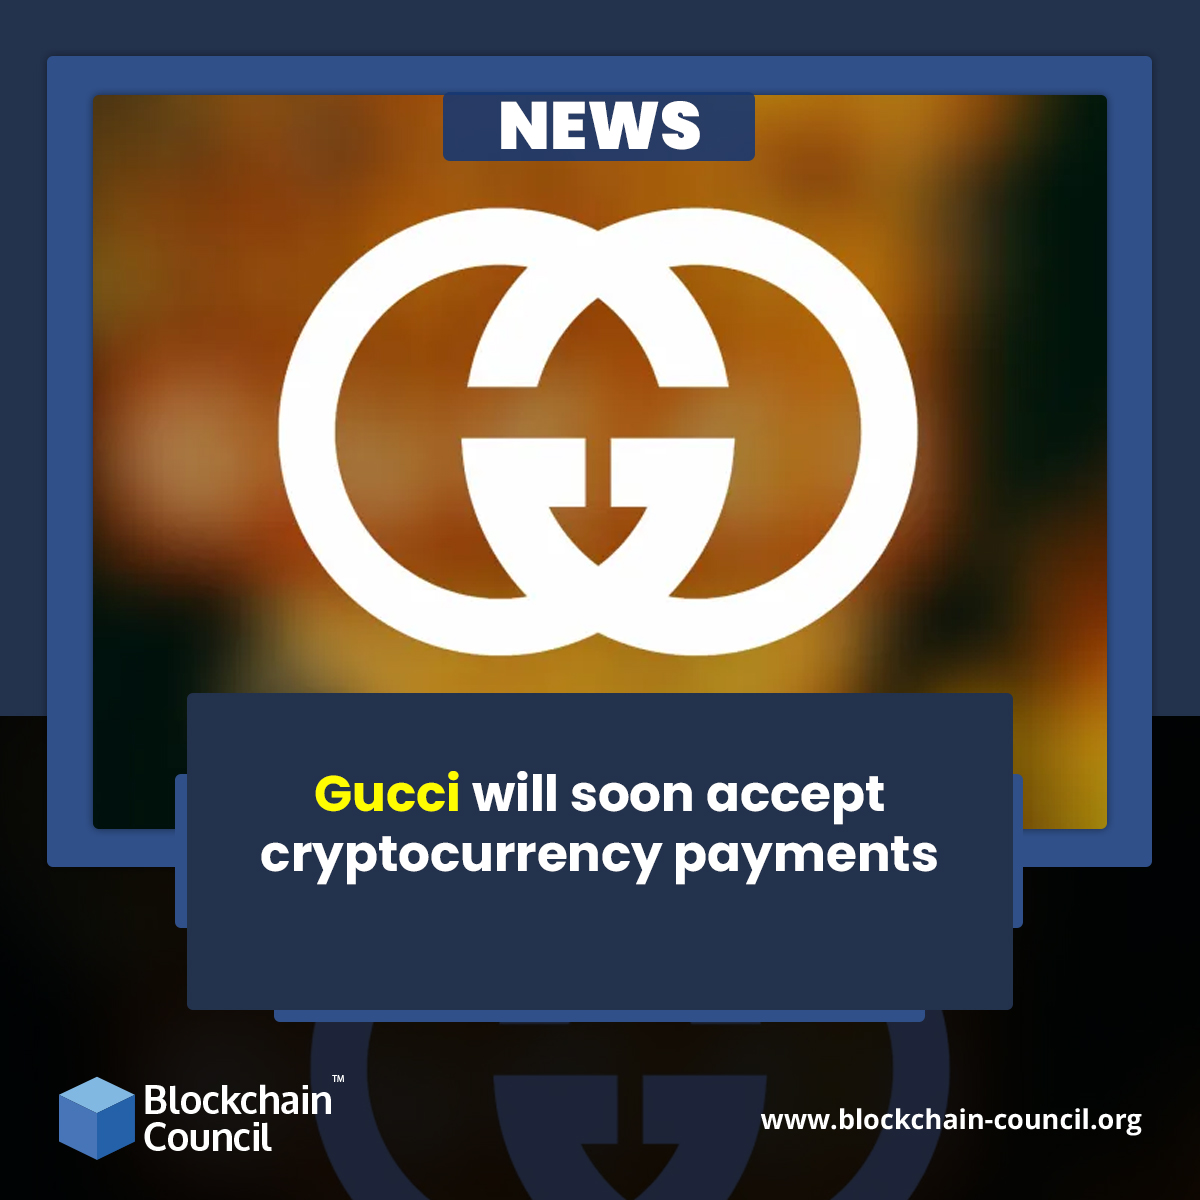 Gucci will soon accept cryptocurrency payments